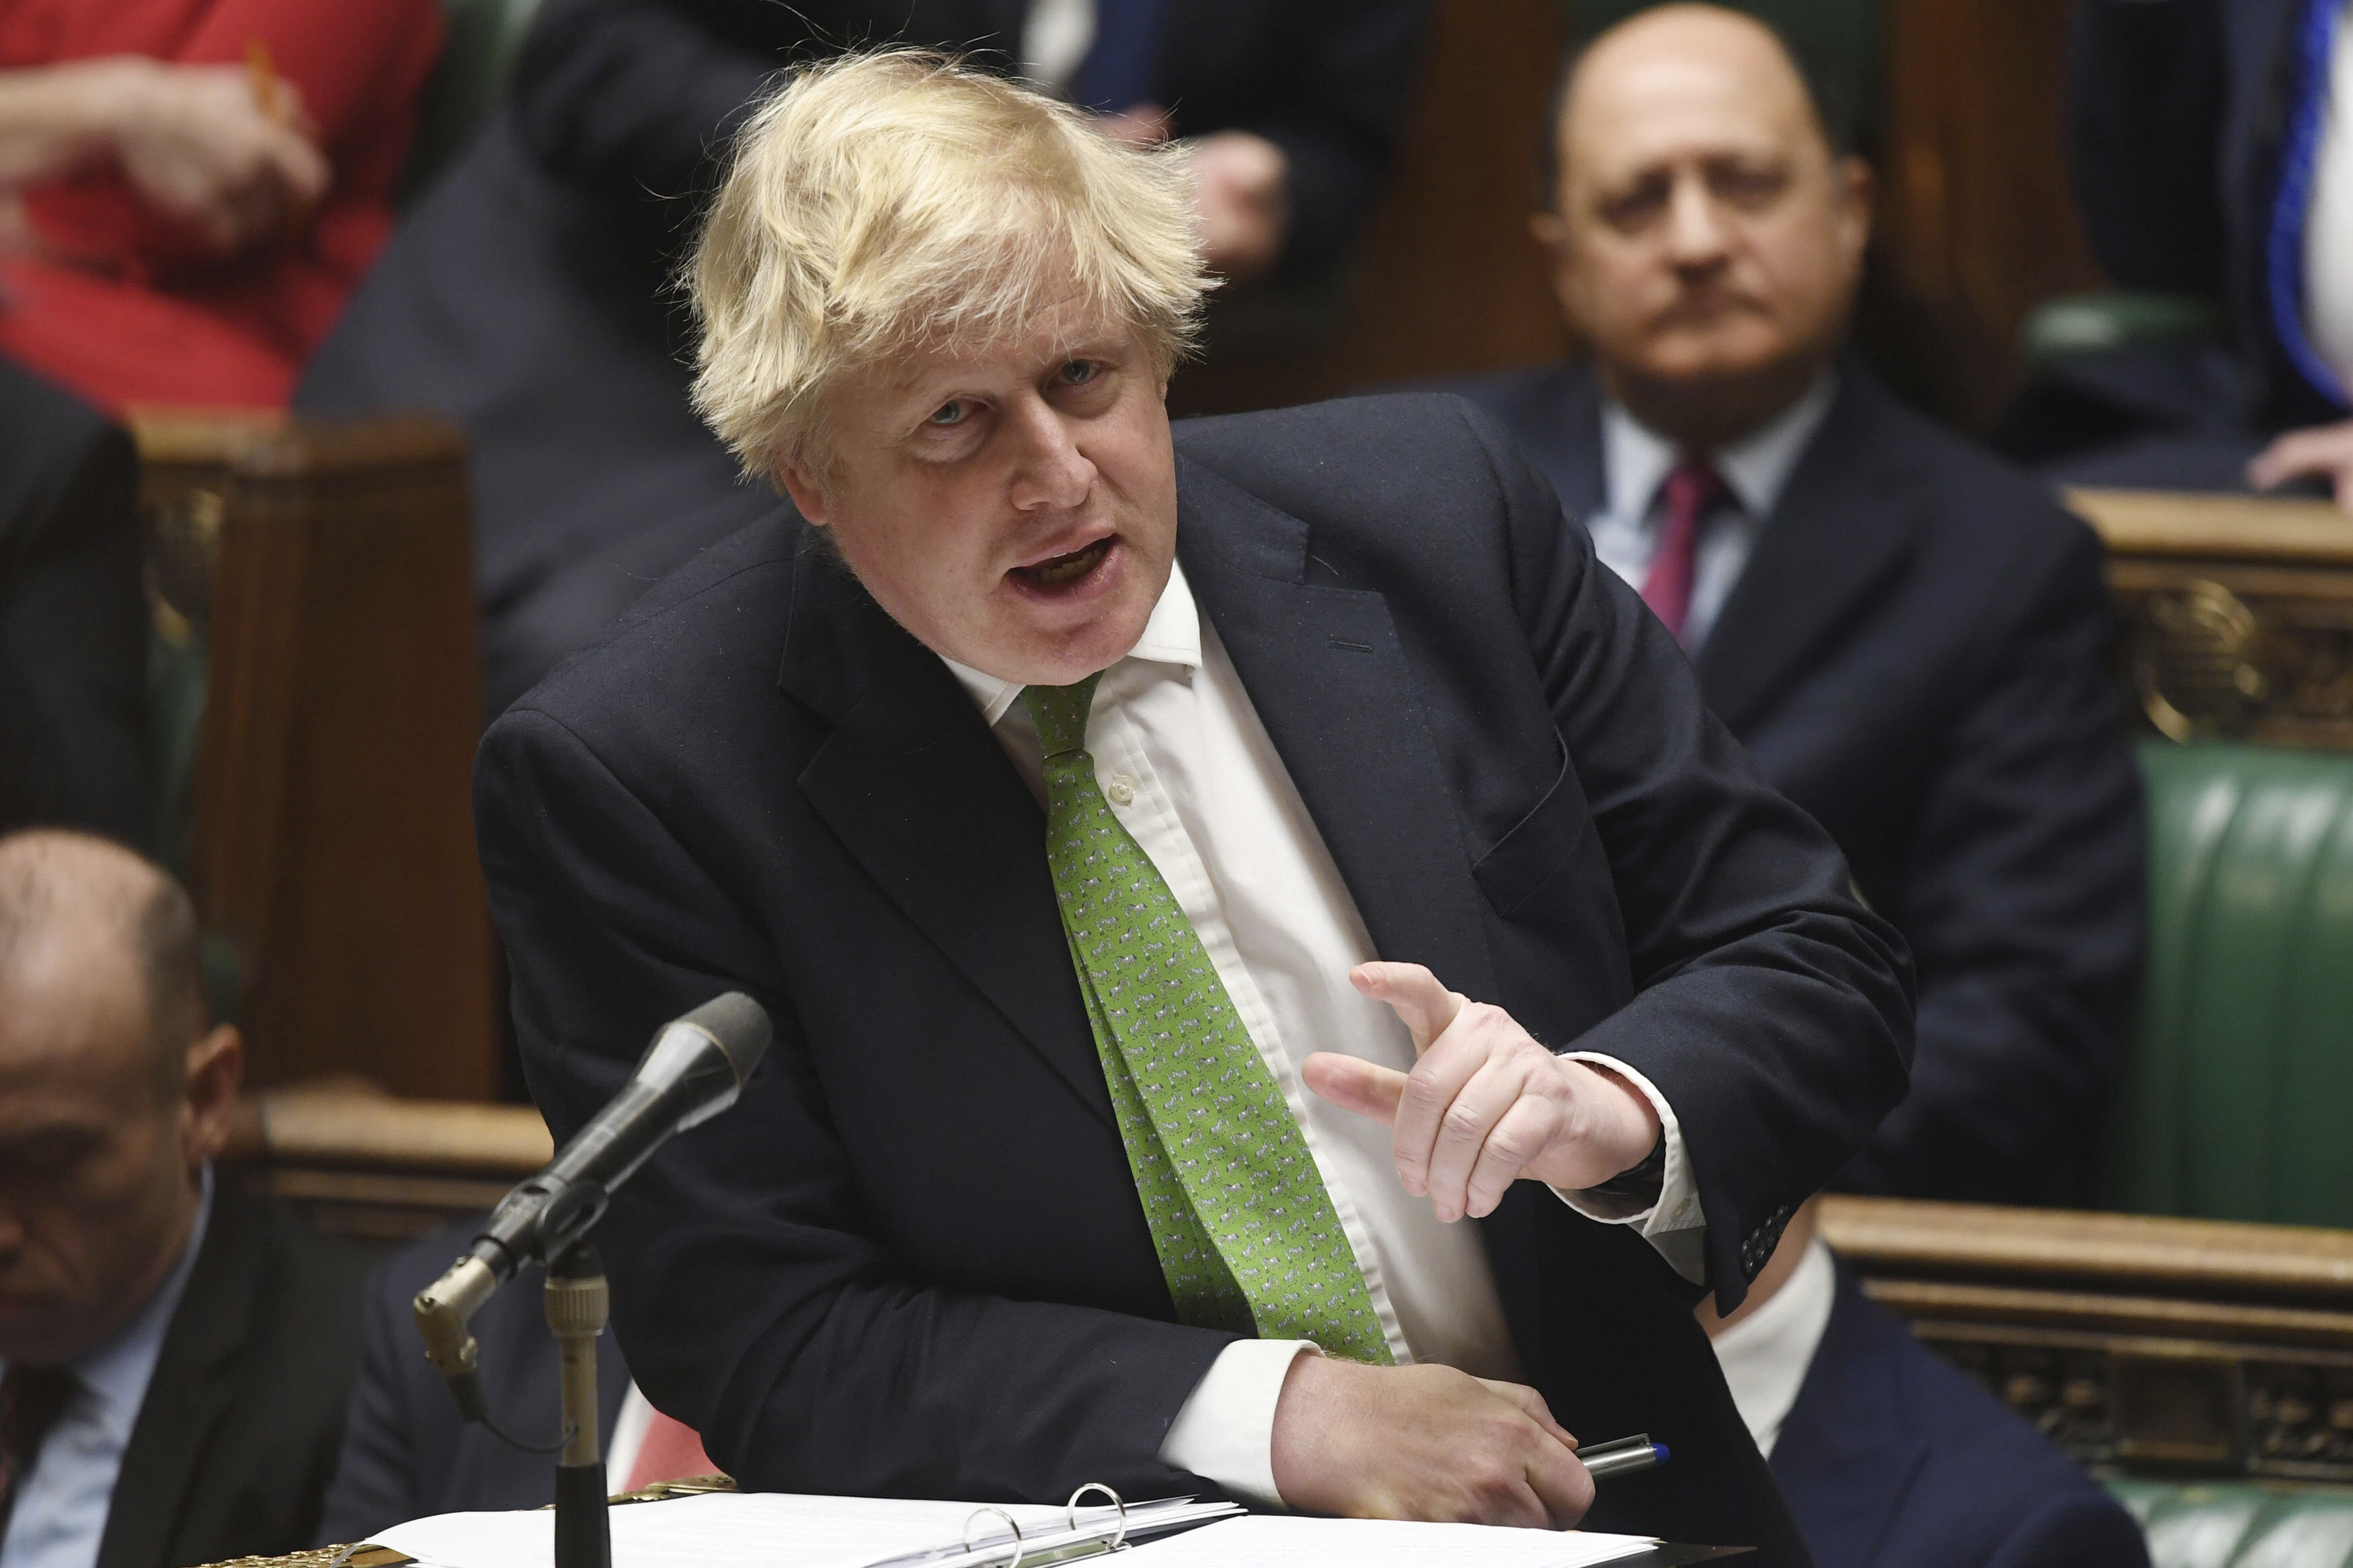 In this handout photo provided by UK Parliament, Britain's Prime Minister Boris Johnson updates MPs on the latest situation in Ukraine, in the House of Commons in London, on February 22 .